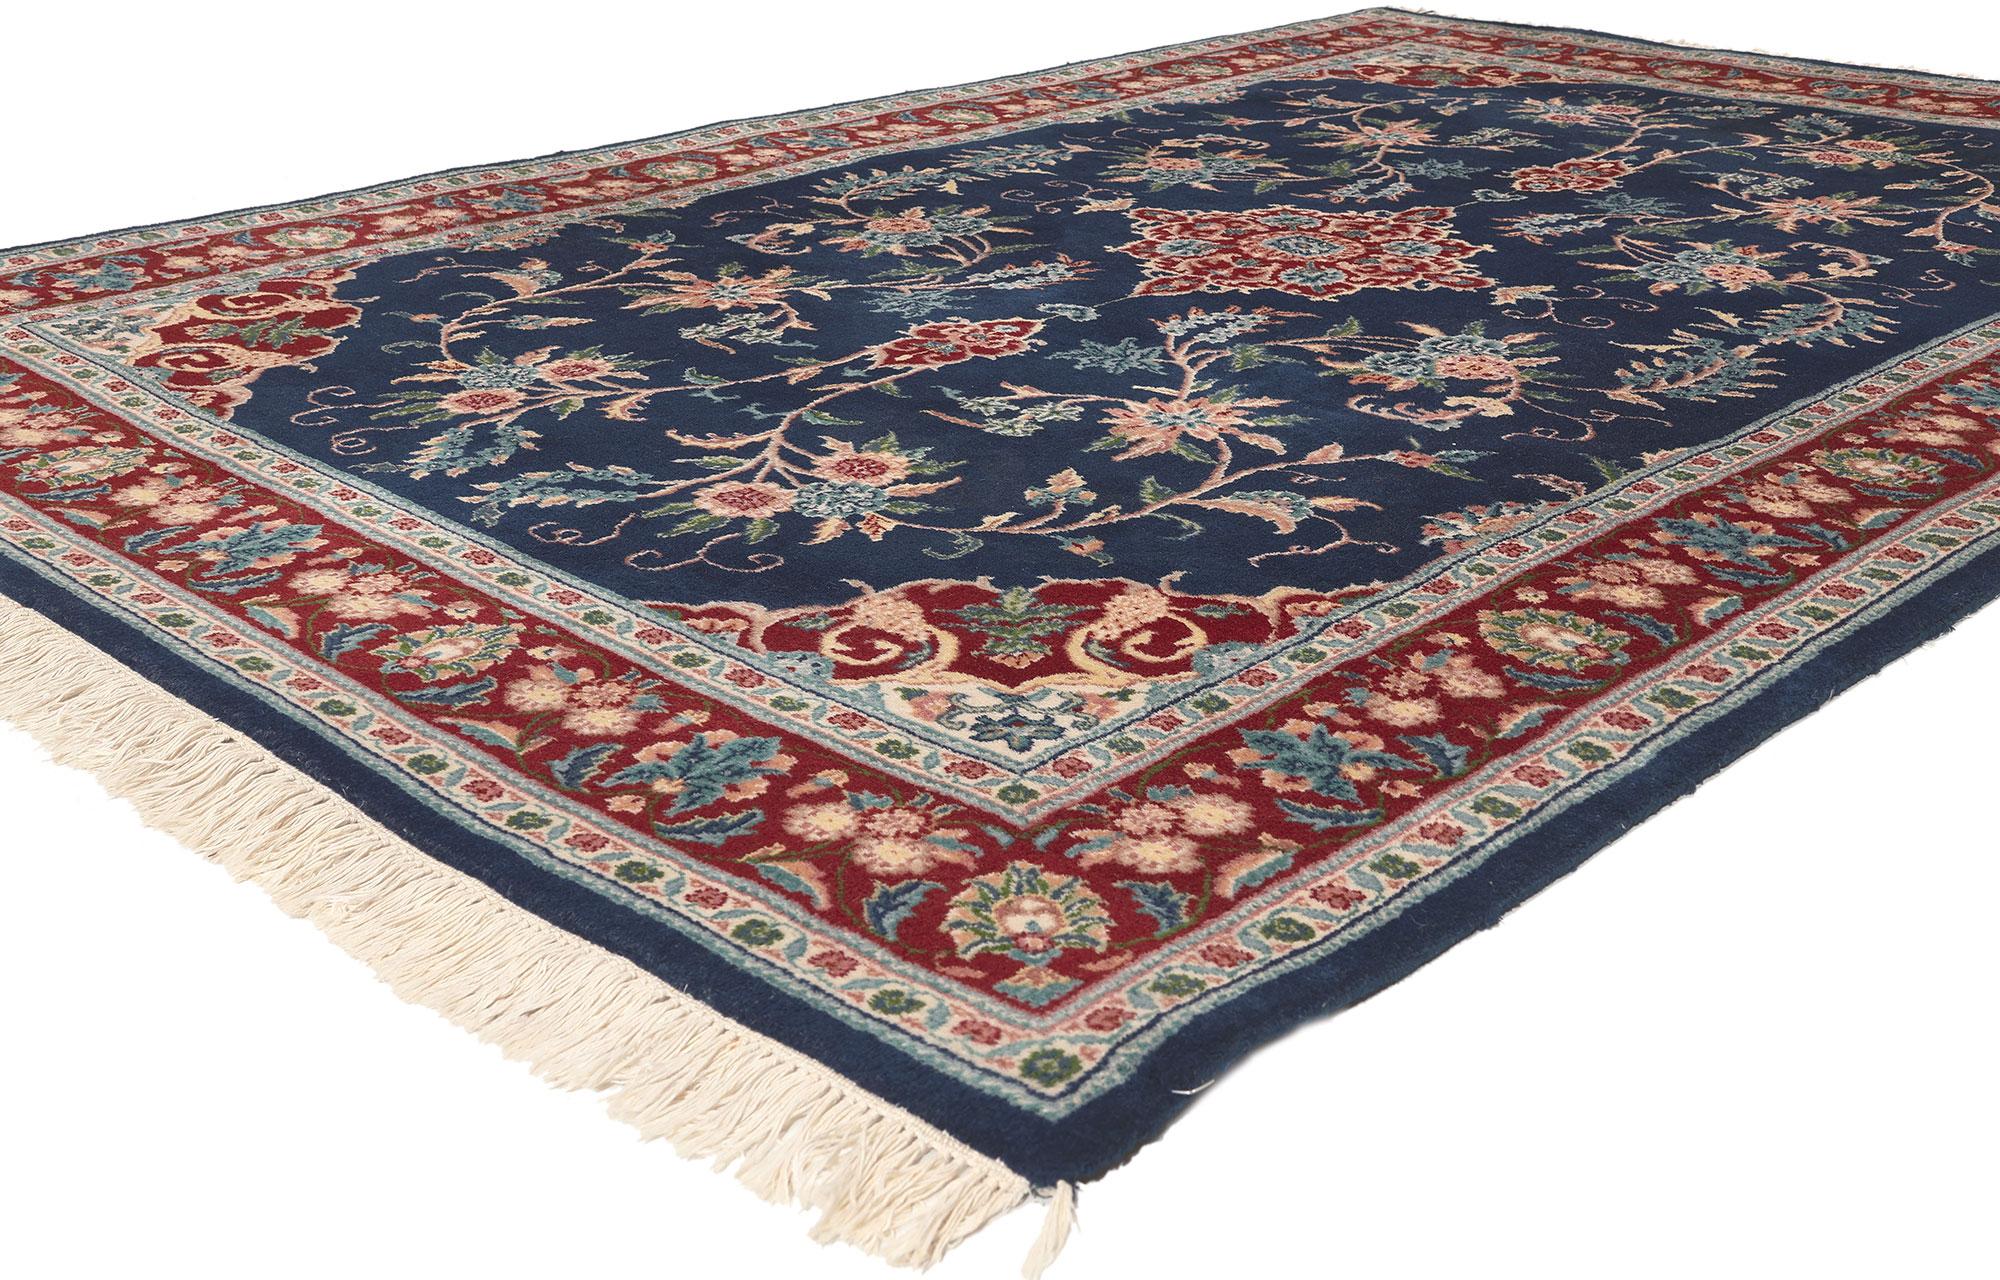 78645 Vintage Indian Rug, 05'09 x 08'09.
Traditional sensibility meets patriotic flair in this vintage Indian rug. The elegant botanical design and classic colors woven into this piece work together creating a relaxed yet elevated feel such as